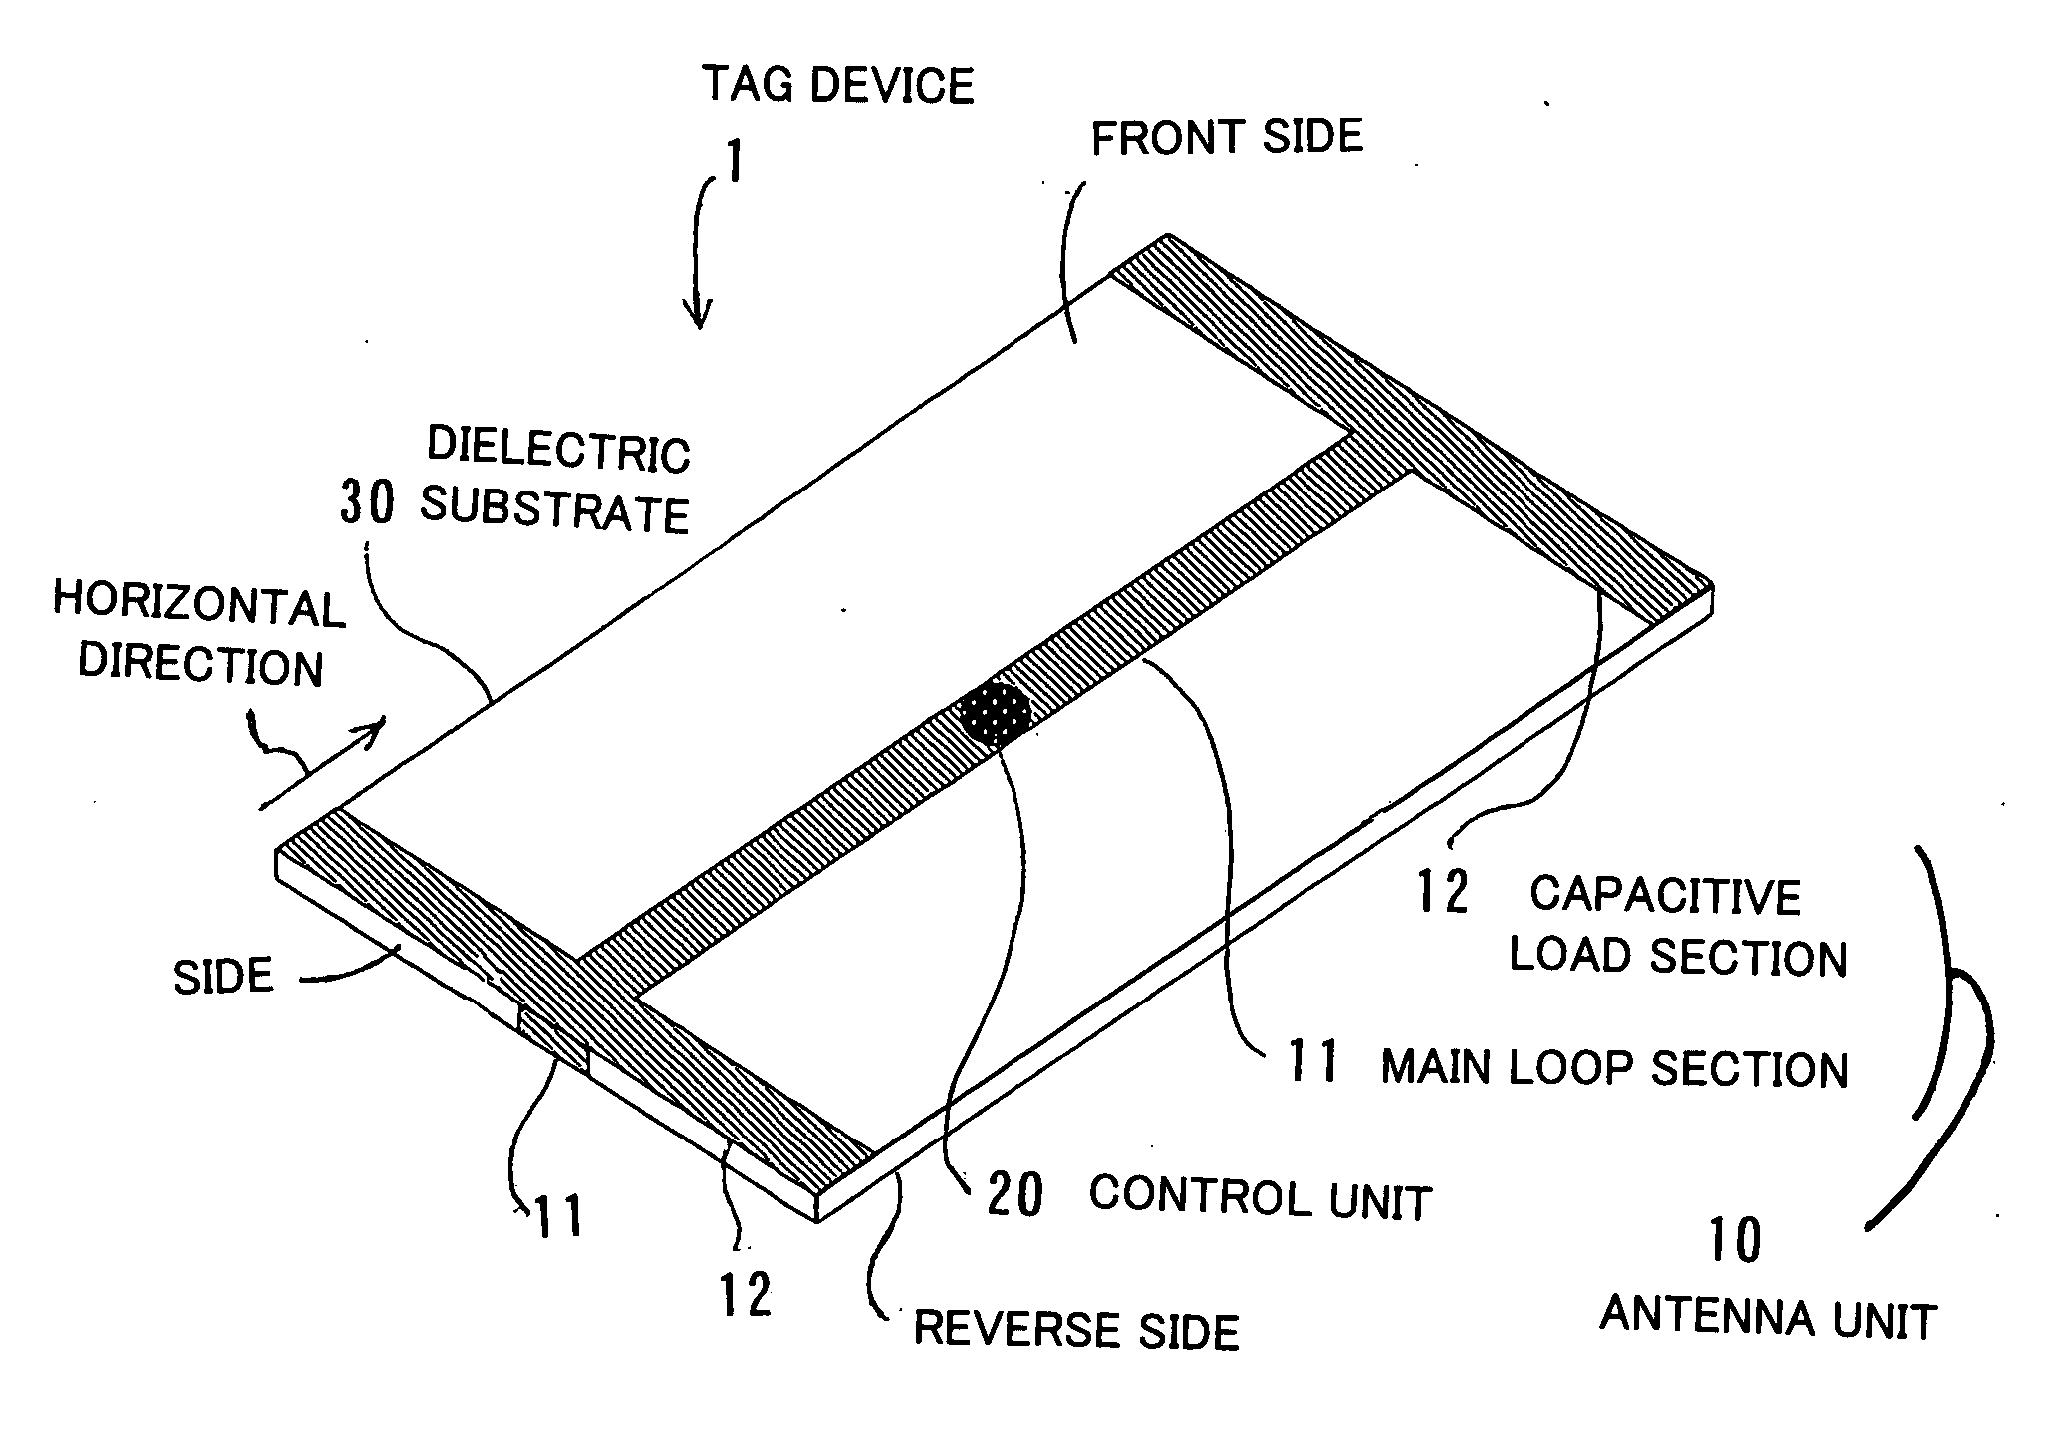 Tag device, antenna, and portable card